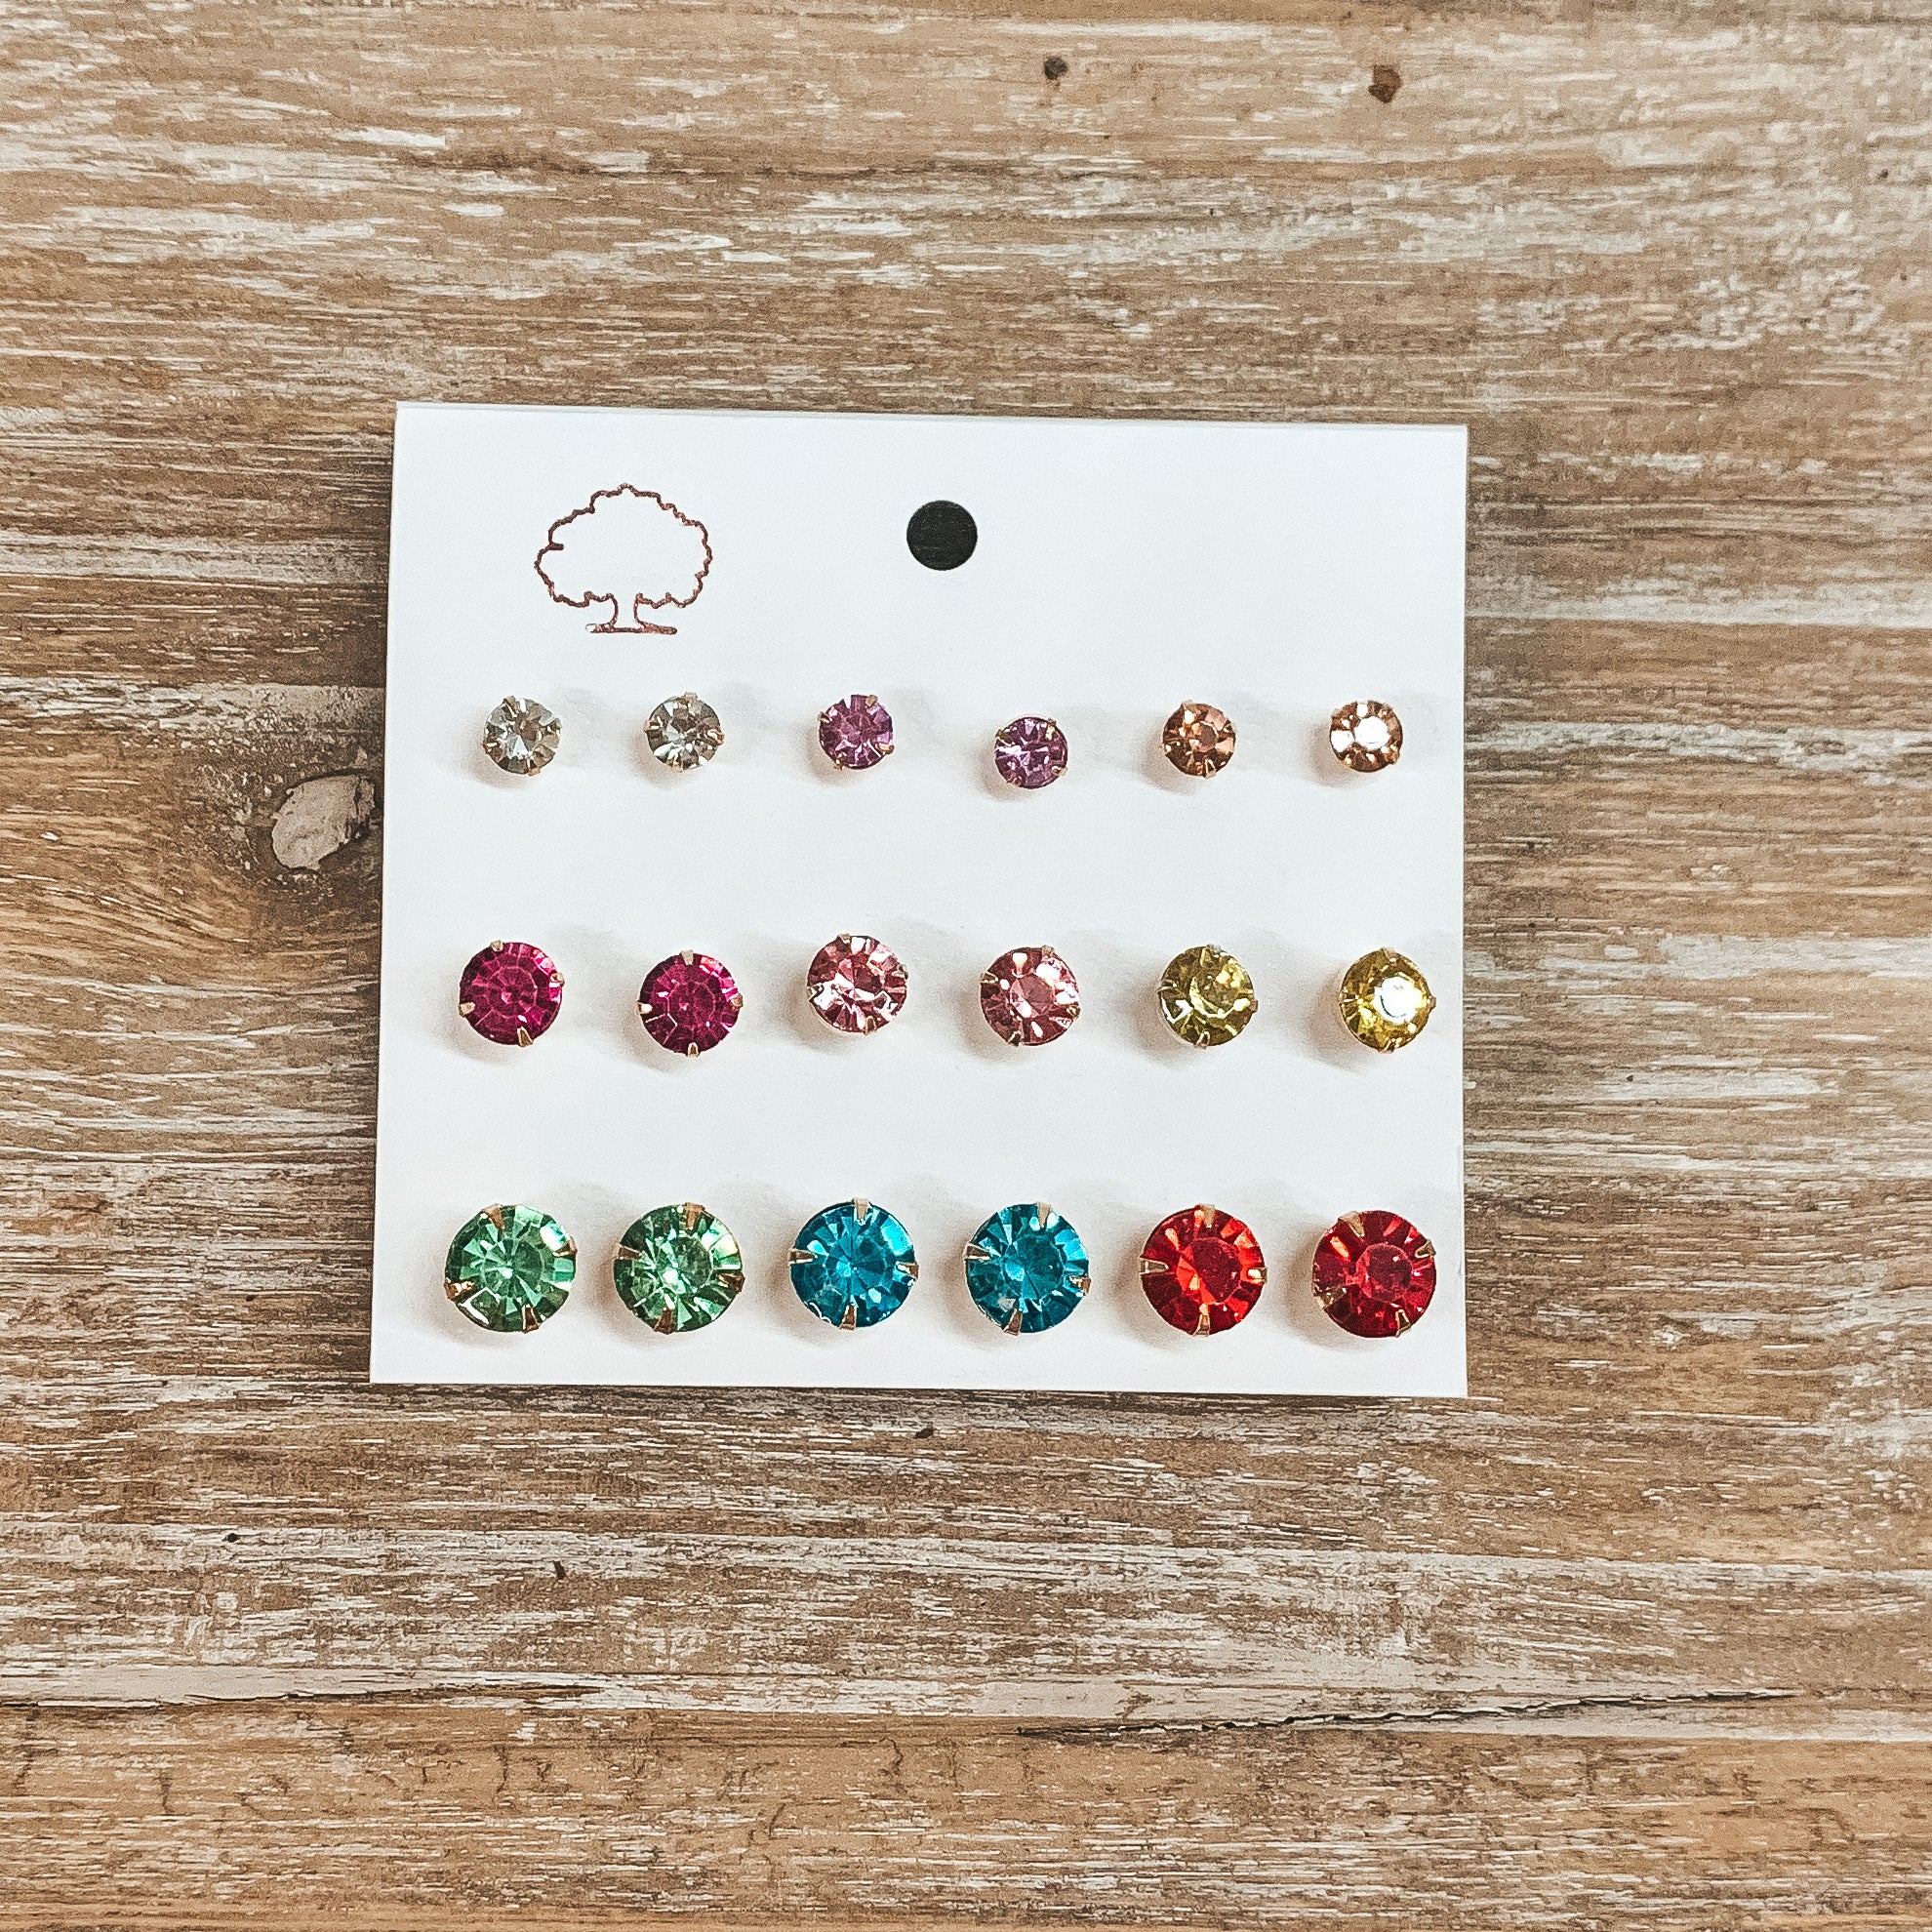 This is a pack of nine multicolored crystal stud earrings in clear, pink, yellow, green, blue, and red. These earrings are on a white earring card holder and taken on a wooden slate.